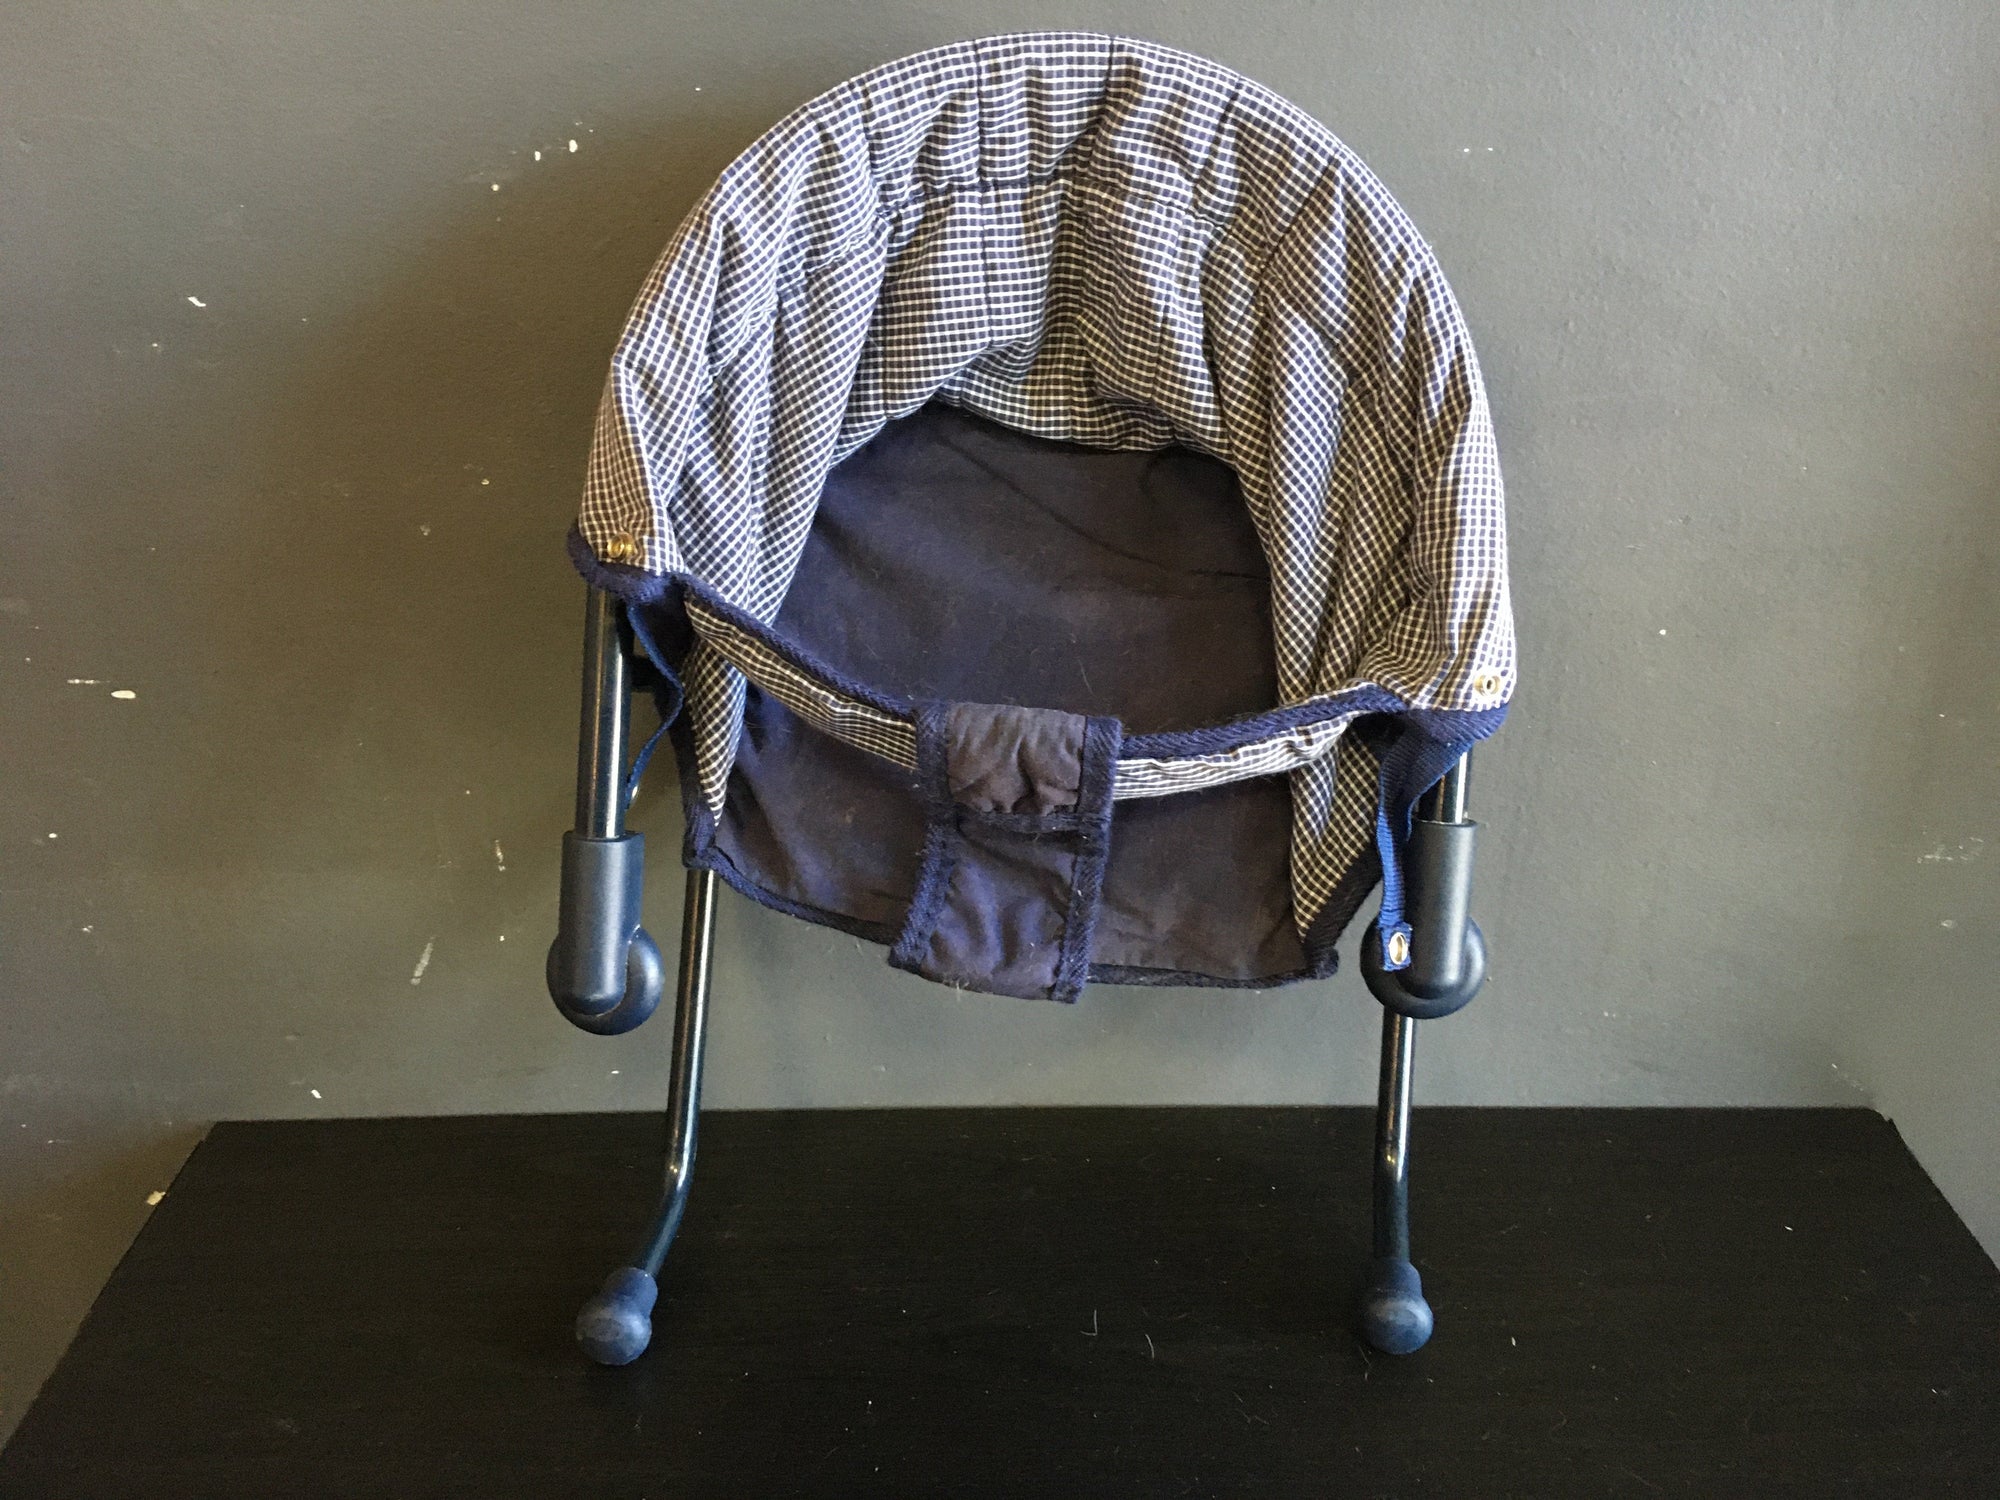 Baby Feeding Chair (fits to table) - 2ndhandwarehouse.com